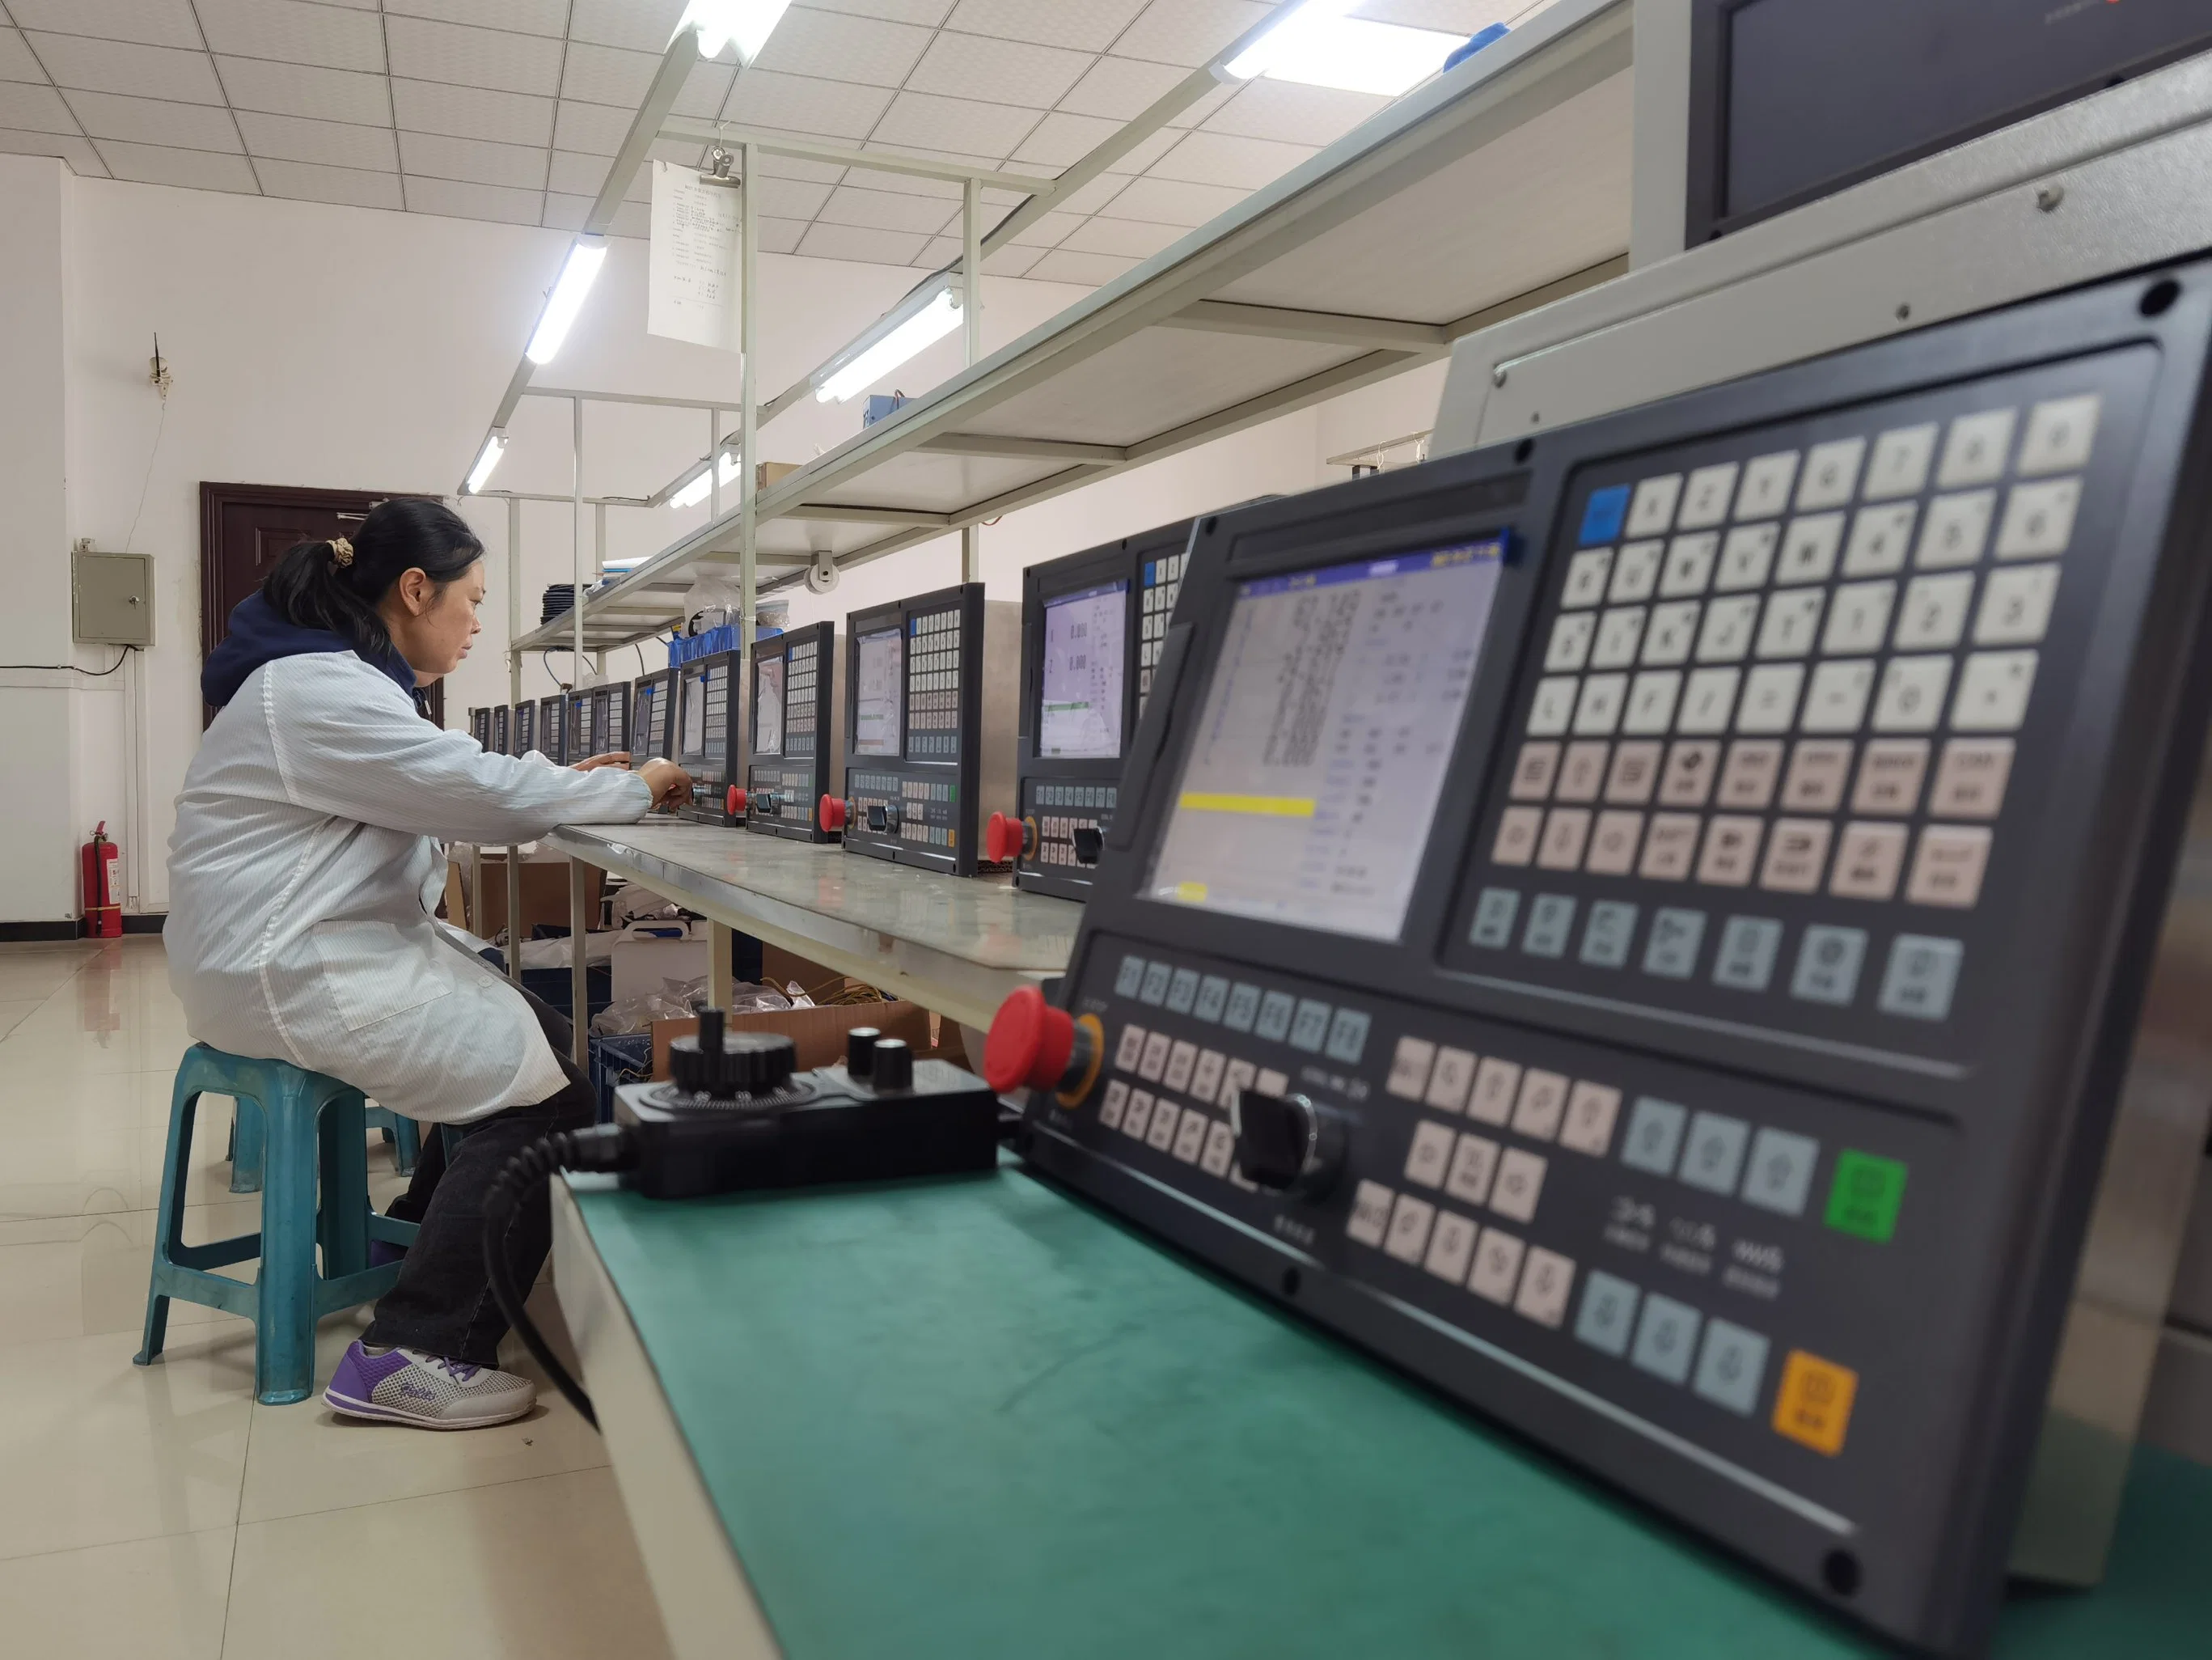 Digital Manufacturing Computer Numerical Control Metal Processing Controller Used for Milling Cutting Turning Drilling Machine Lathe